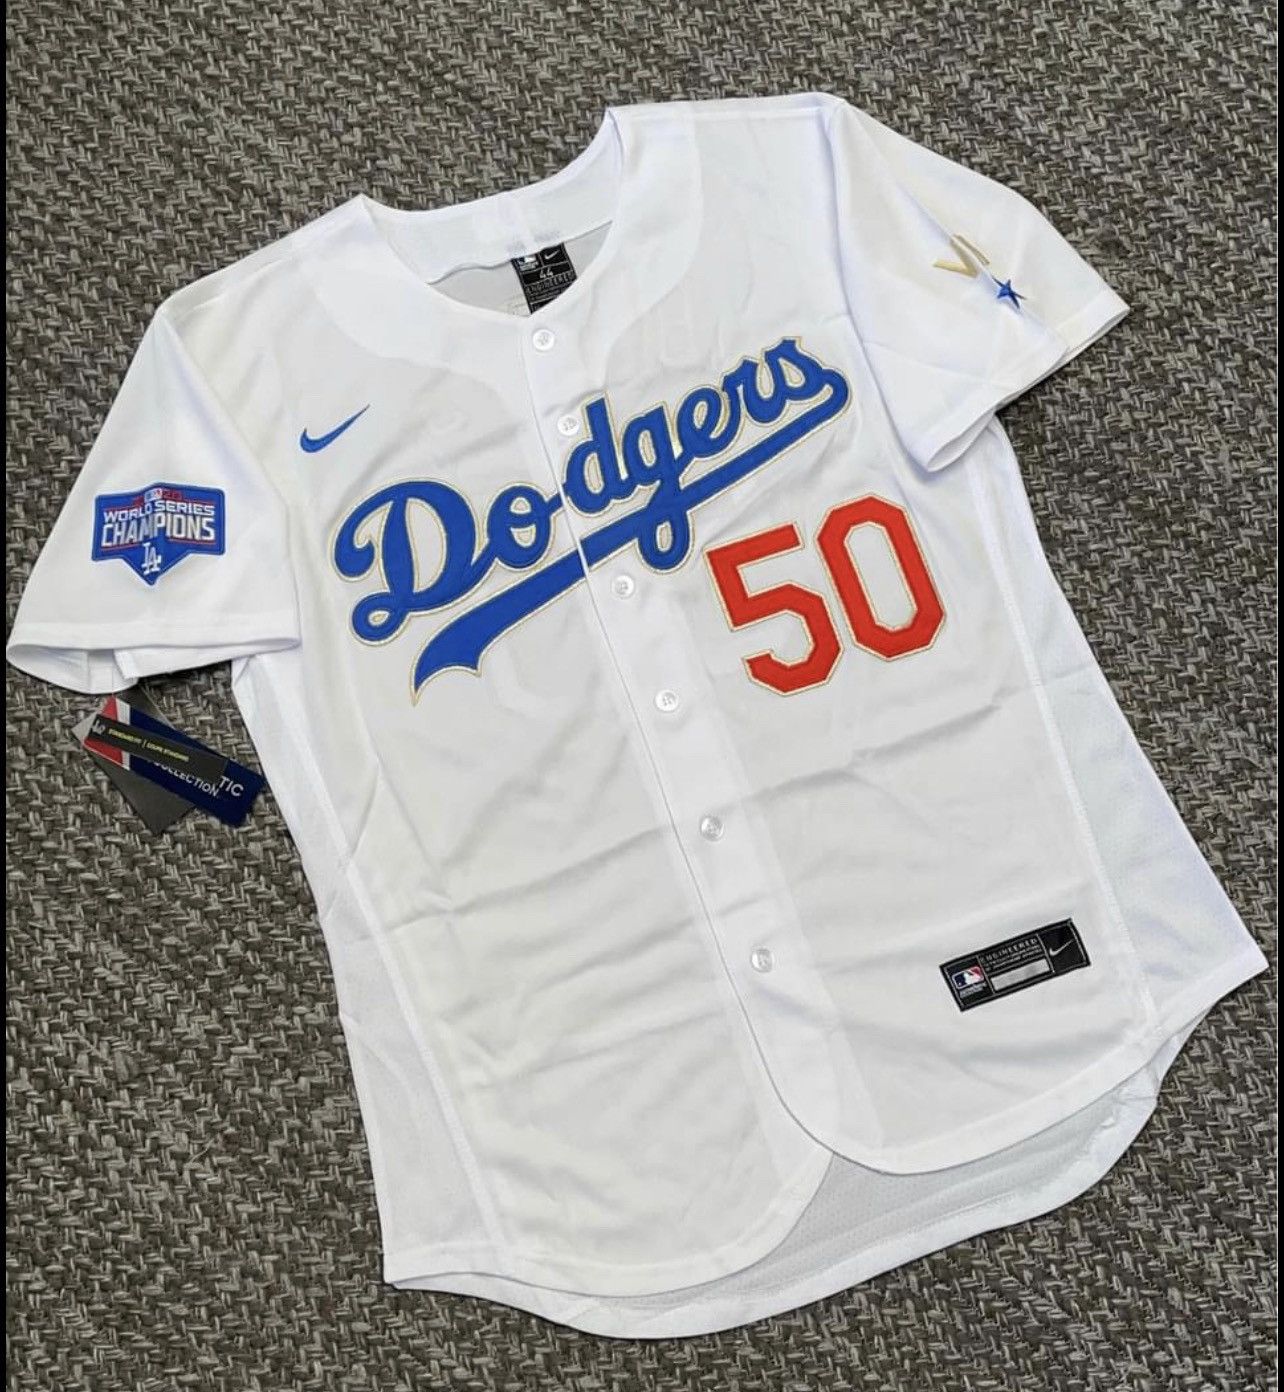 Mookie Betts Dodgers Jersey Gold Trim..everything Stitched..size